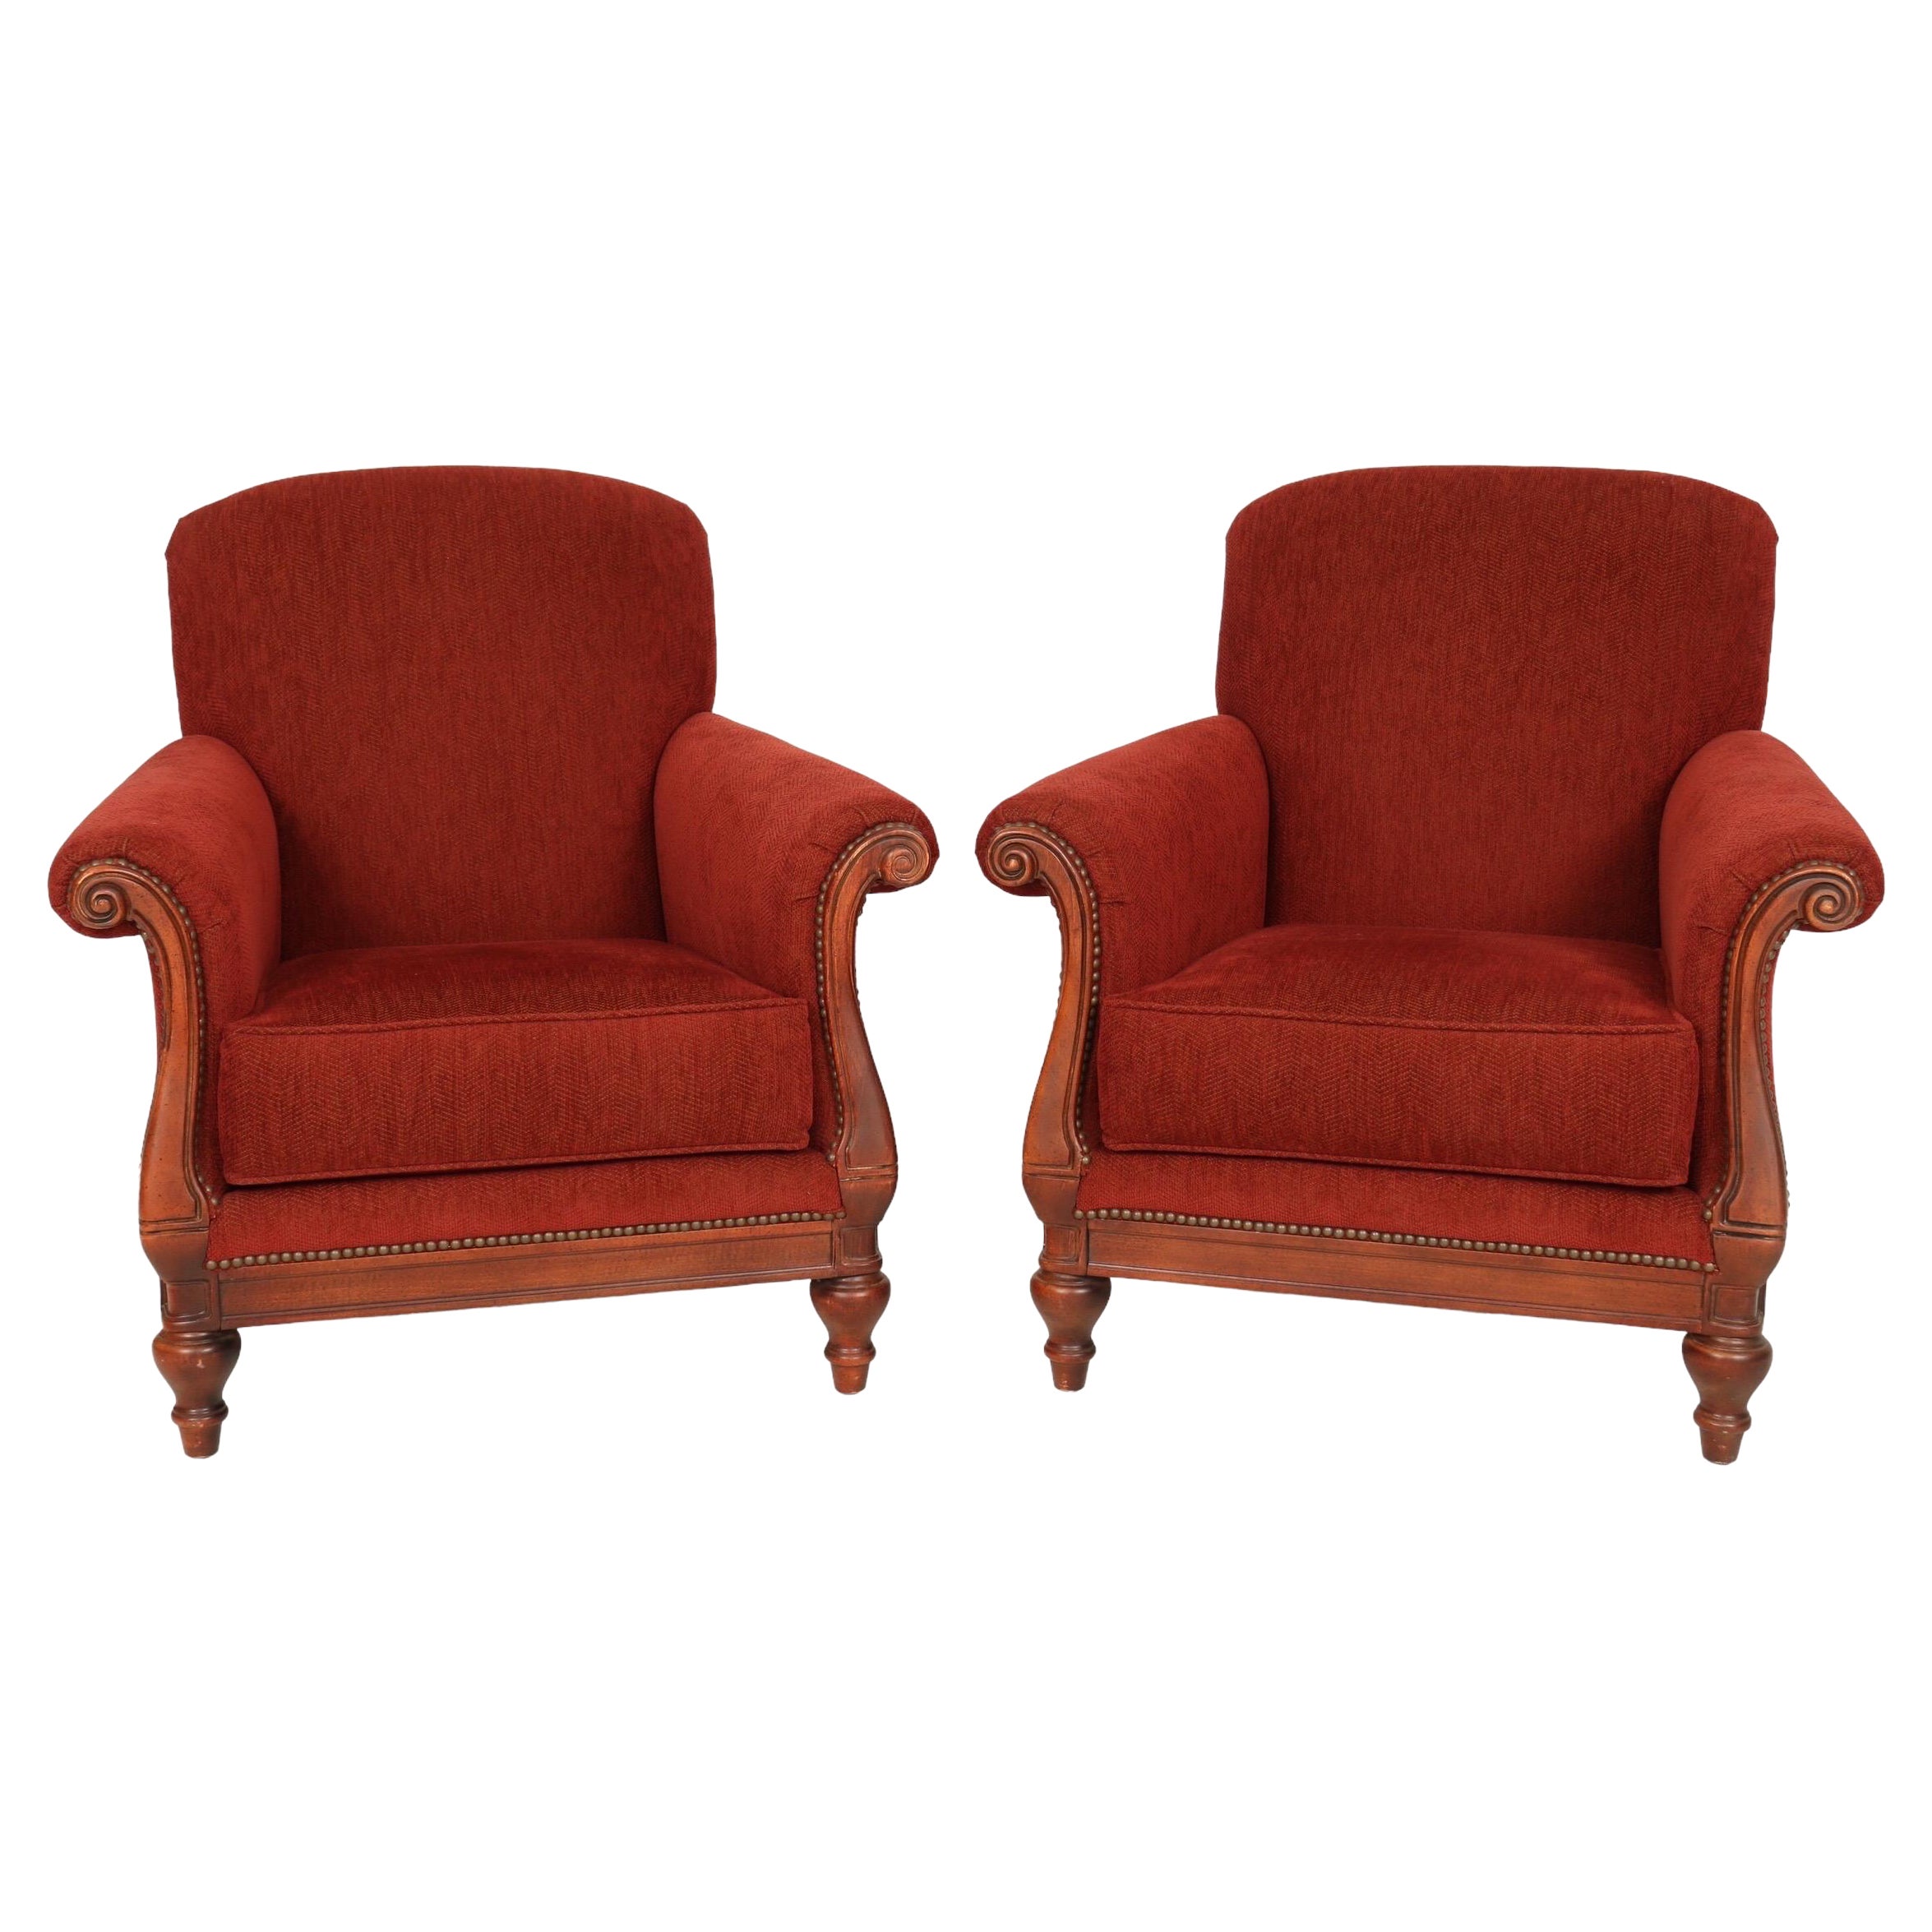 Red Armchairs by Thomasville, Pair